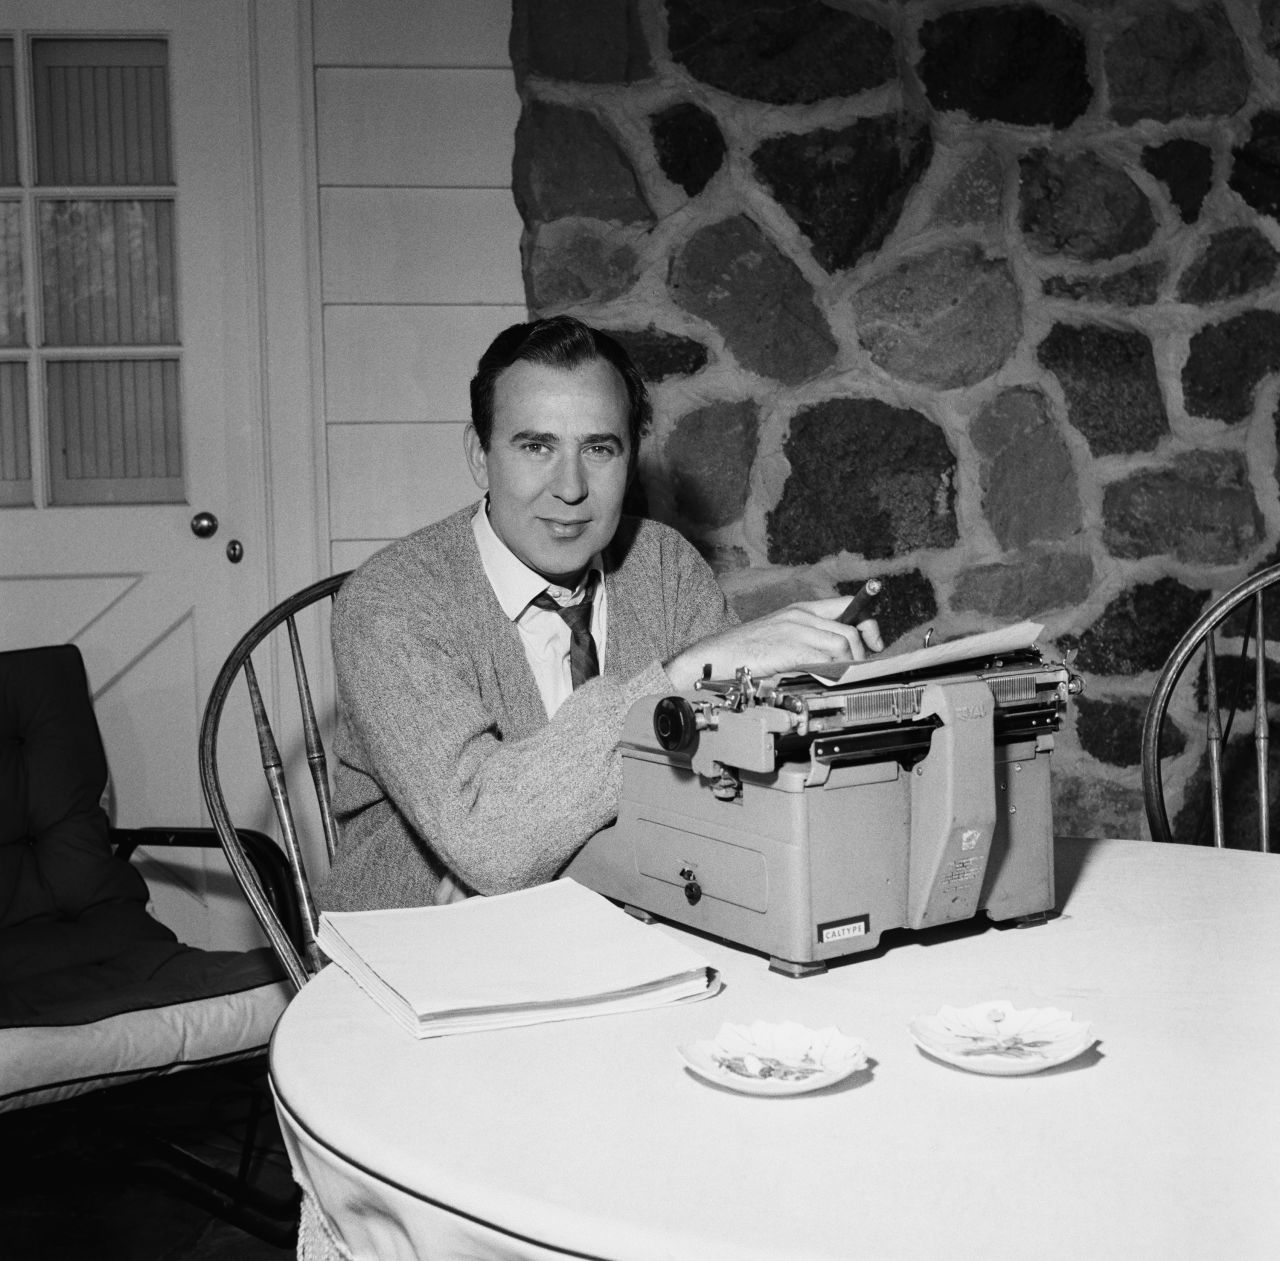 Reiner is pictured at a typewriter in 1960. As a performer, Reiner preferred to play straight man or work behind the scenes.<br />.